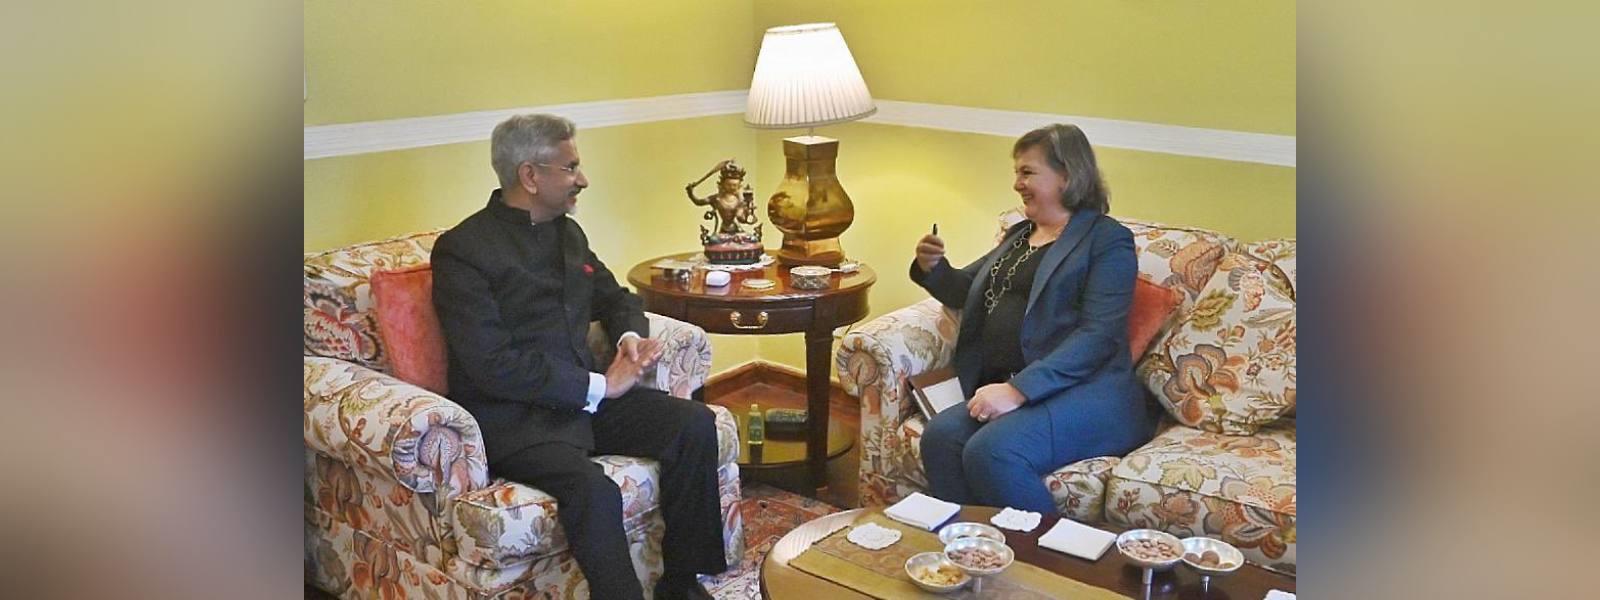 External Affairs Minister Dr. S. Jaishankar met H. E. Ms. Victoria Nuland, Under Secretary of State for Political Affairs of United States in New Delhi